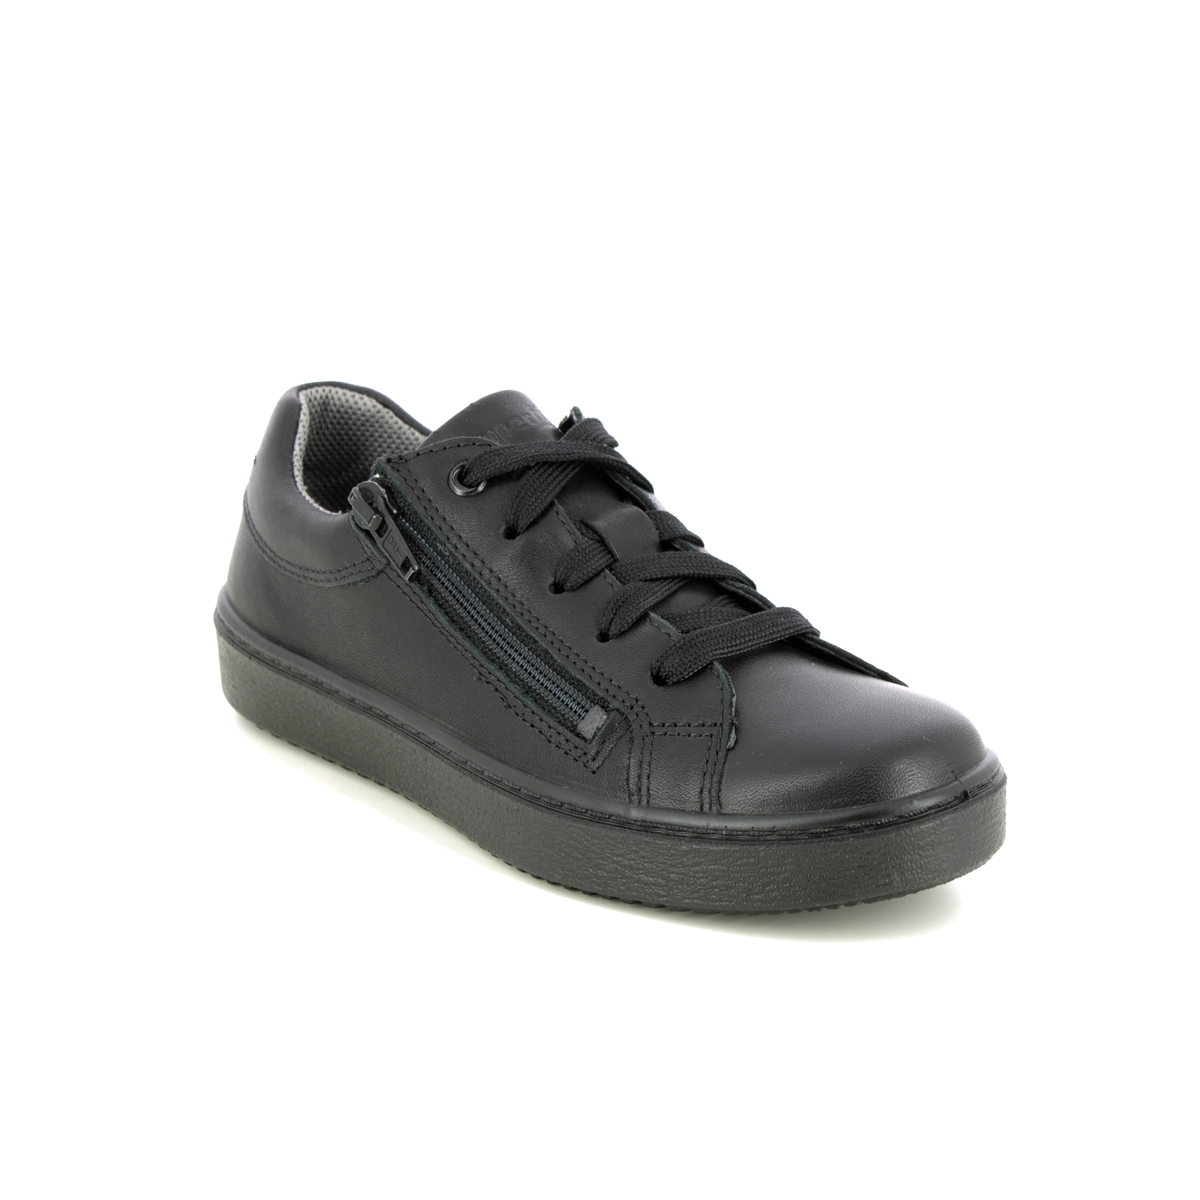 Superfit Heaven Zip Lace Black Leather Kids Girls Shoes 1006489-0000 In Size 34 In Plain Black Leather For kids